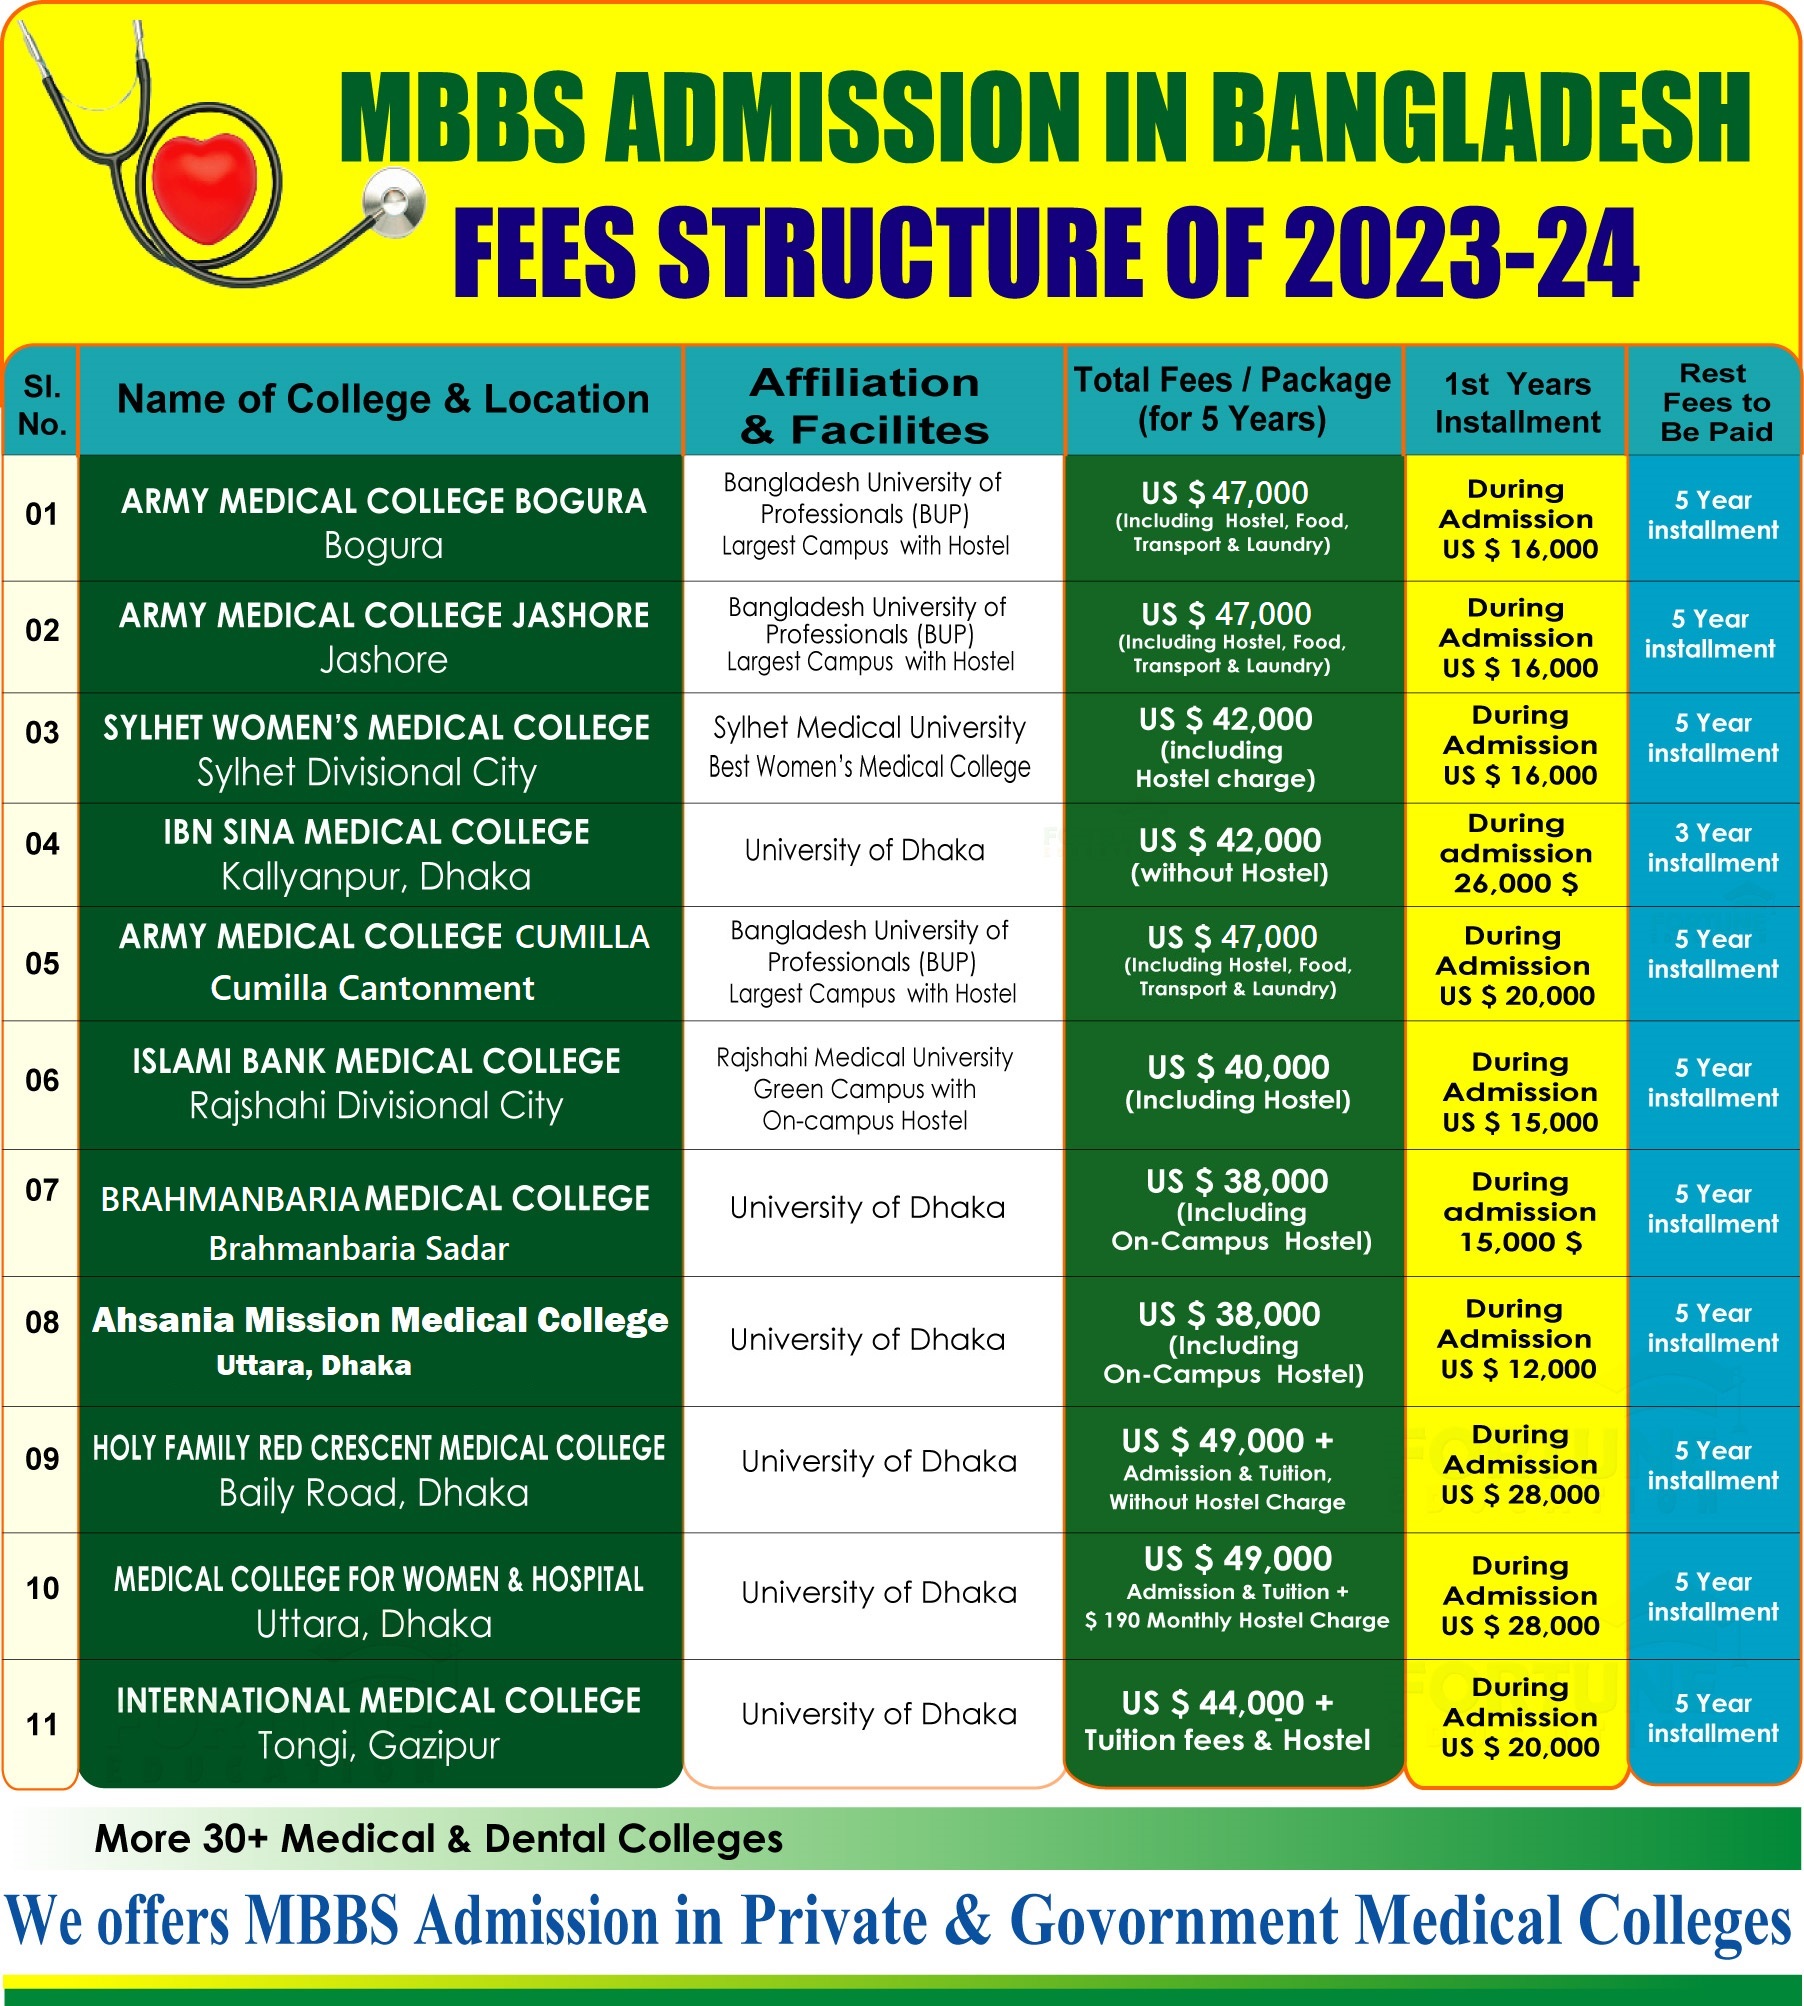 FEES STRUCTURE OF MBBS